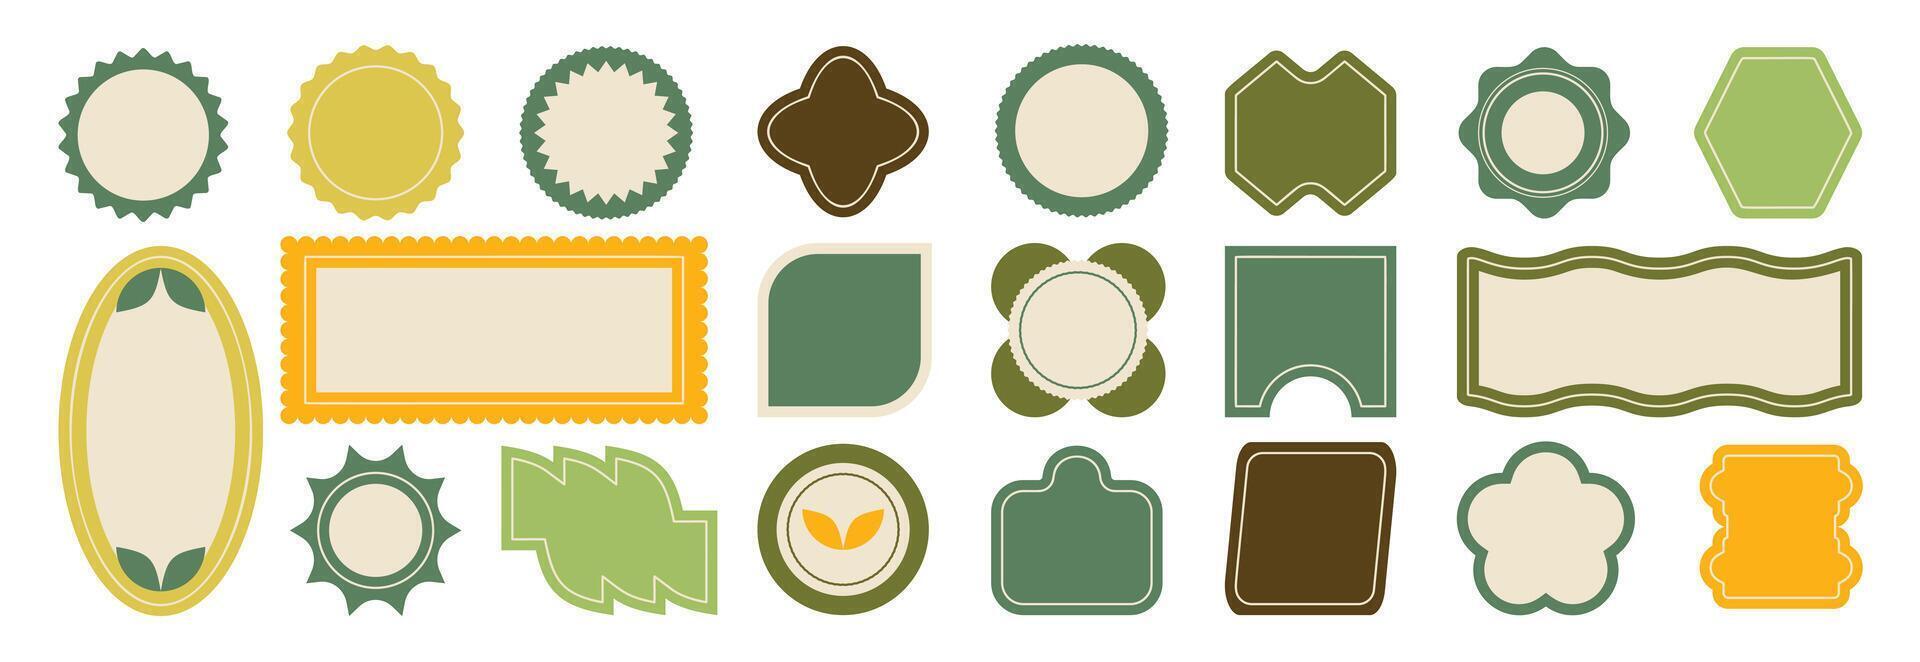 Set of geometric sticker badges vector. Organic banner collection of contemporary figure, leaf, sun, flower, circle, polygon. Eco friendly design for sign, tag, packaging, logo label, stamp, patches. vector